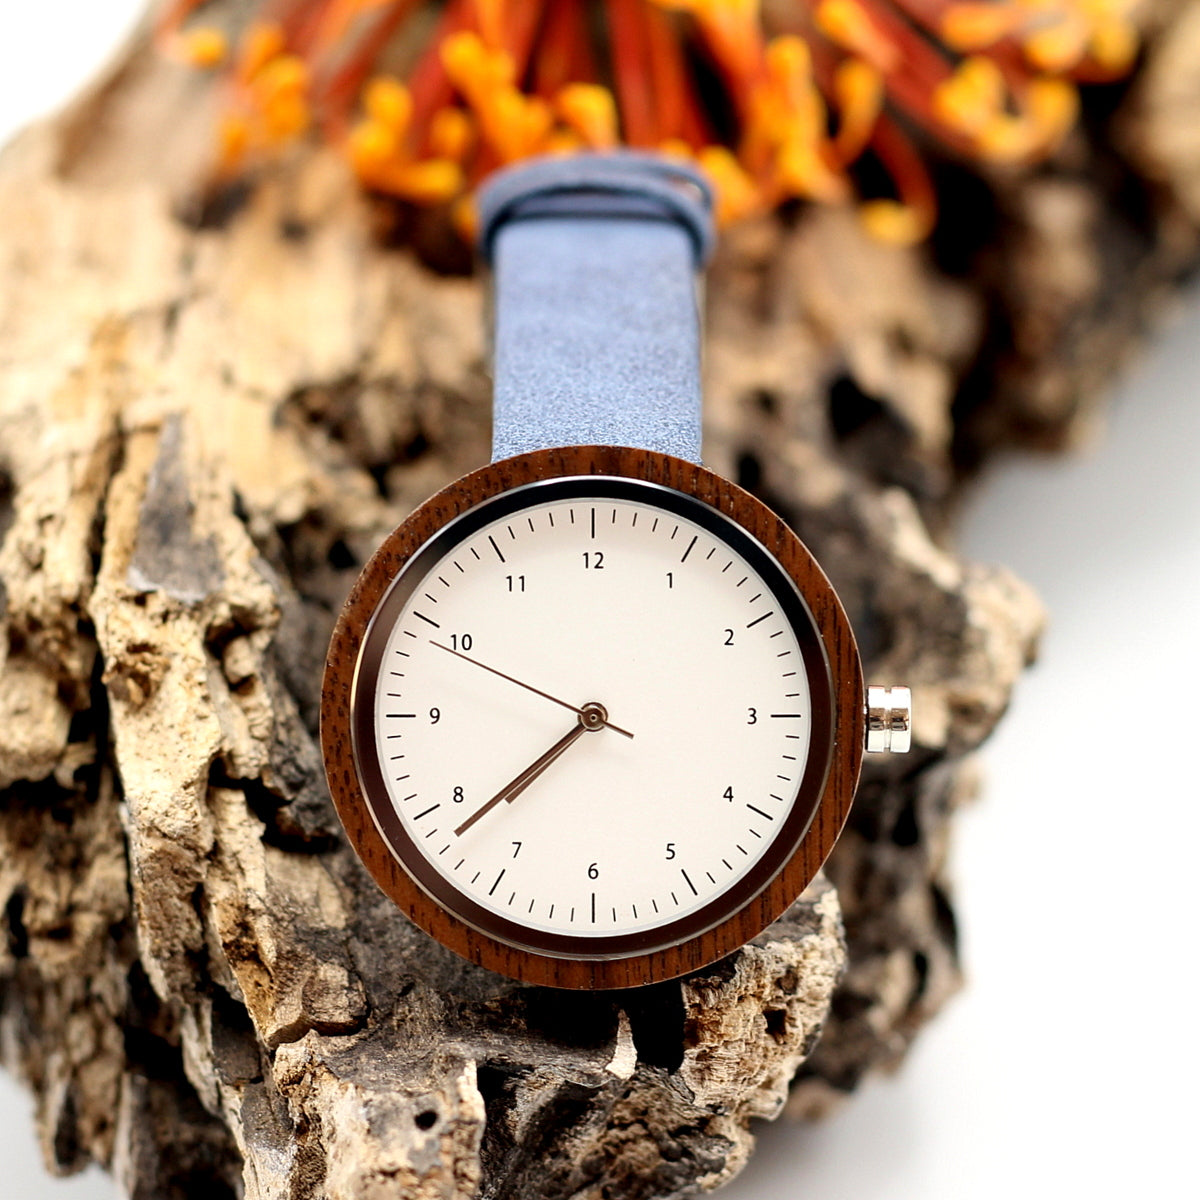 Kanso CUTIE Round Petite Wooden Watch ebony wood with vegan leather blue strap, make it personal and engrave a message on the back. Shipping only R59.